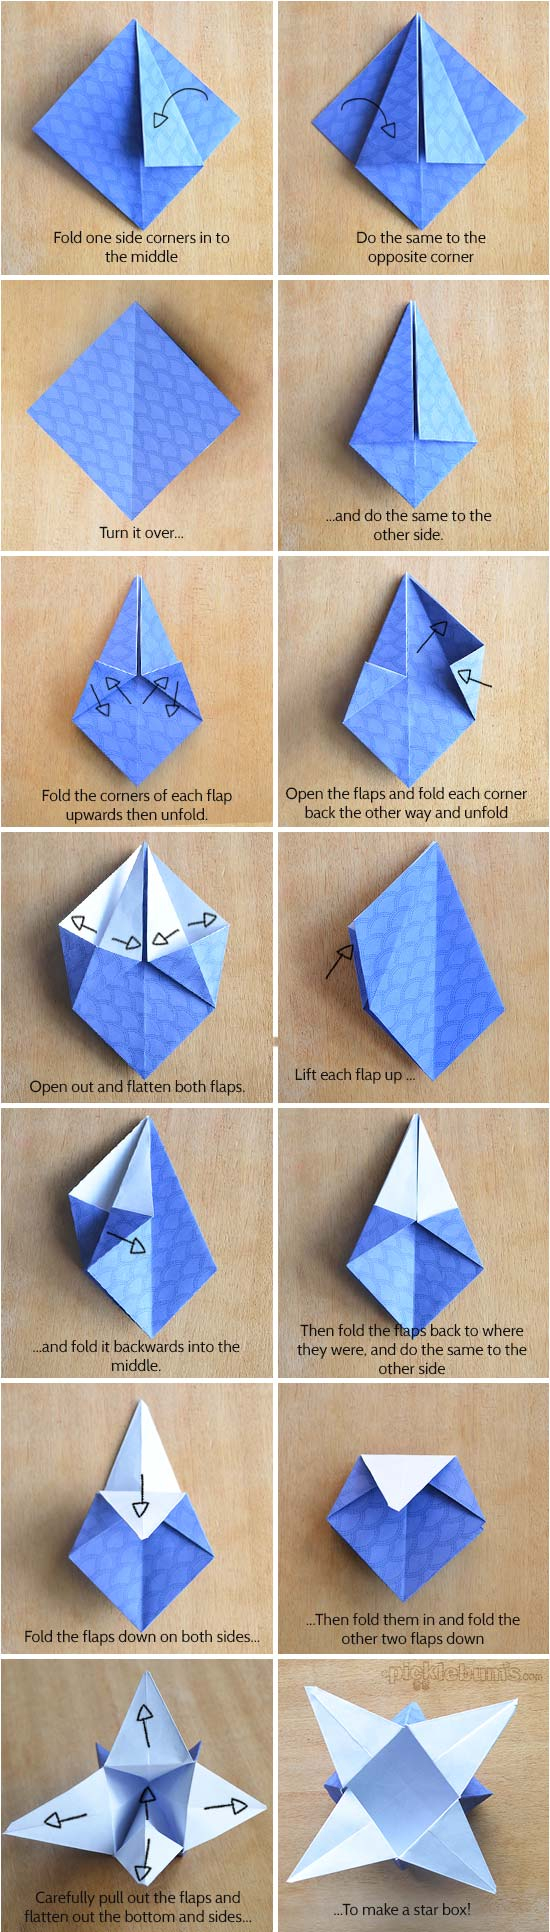 Printable Origami Box Instructions Origami Star Boxes With Printable Origami Paper Picklebums